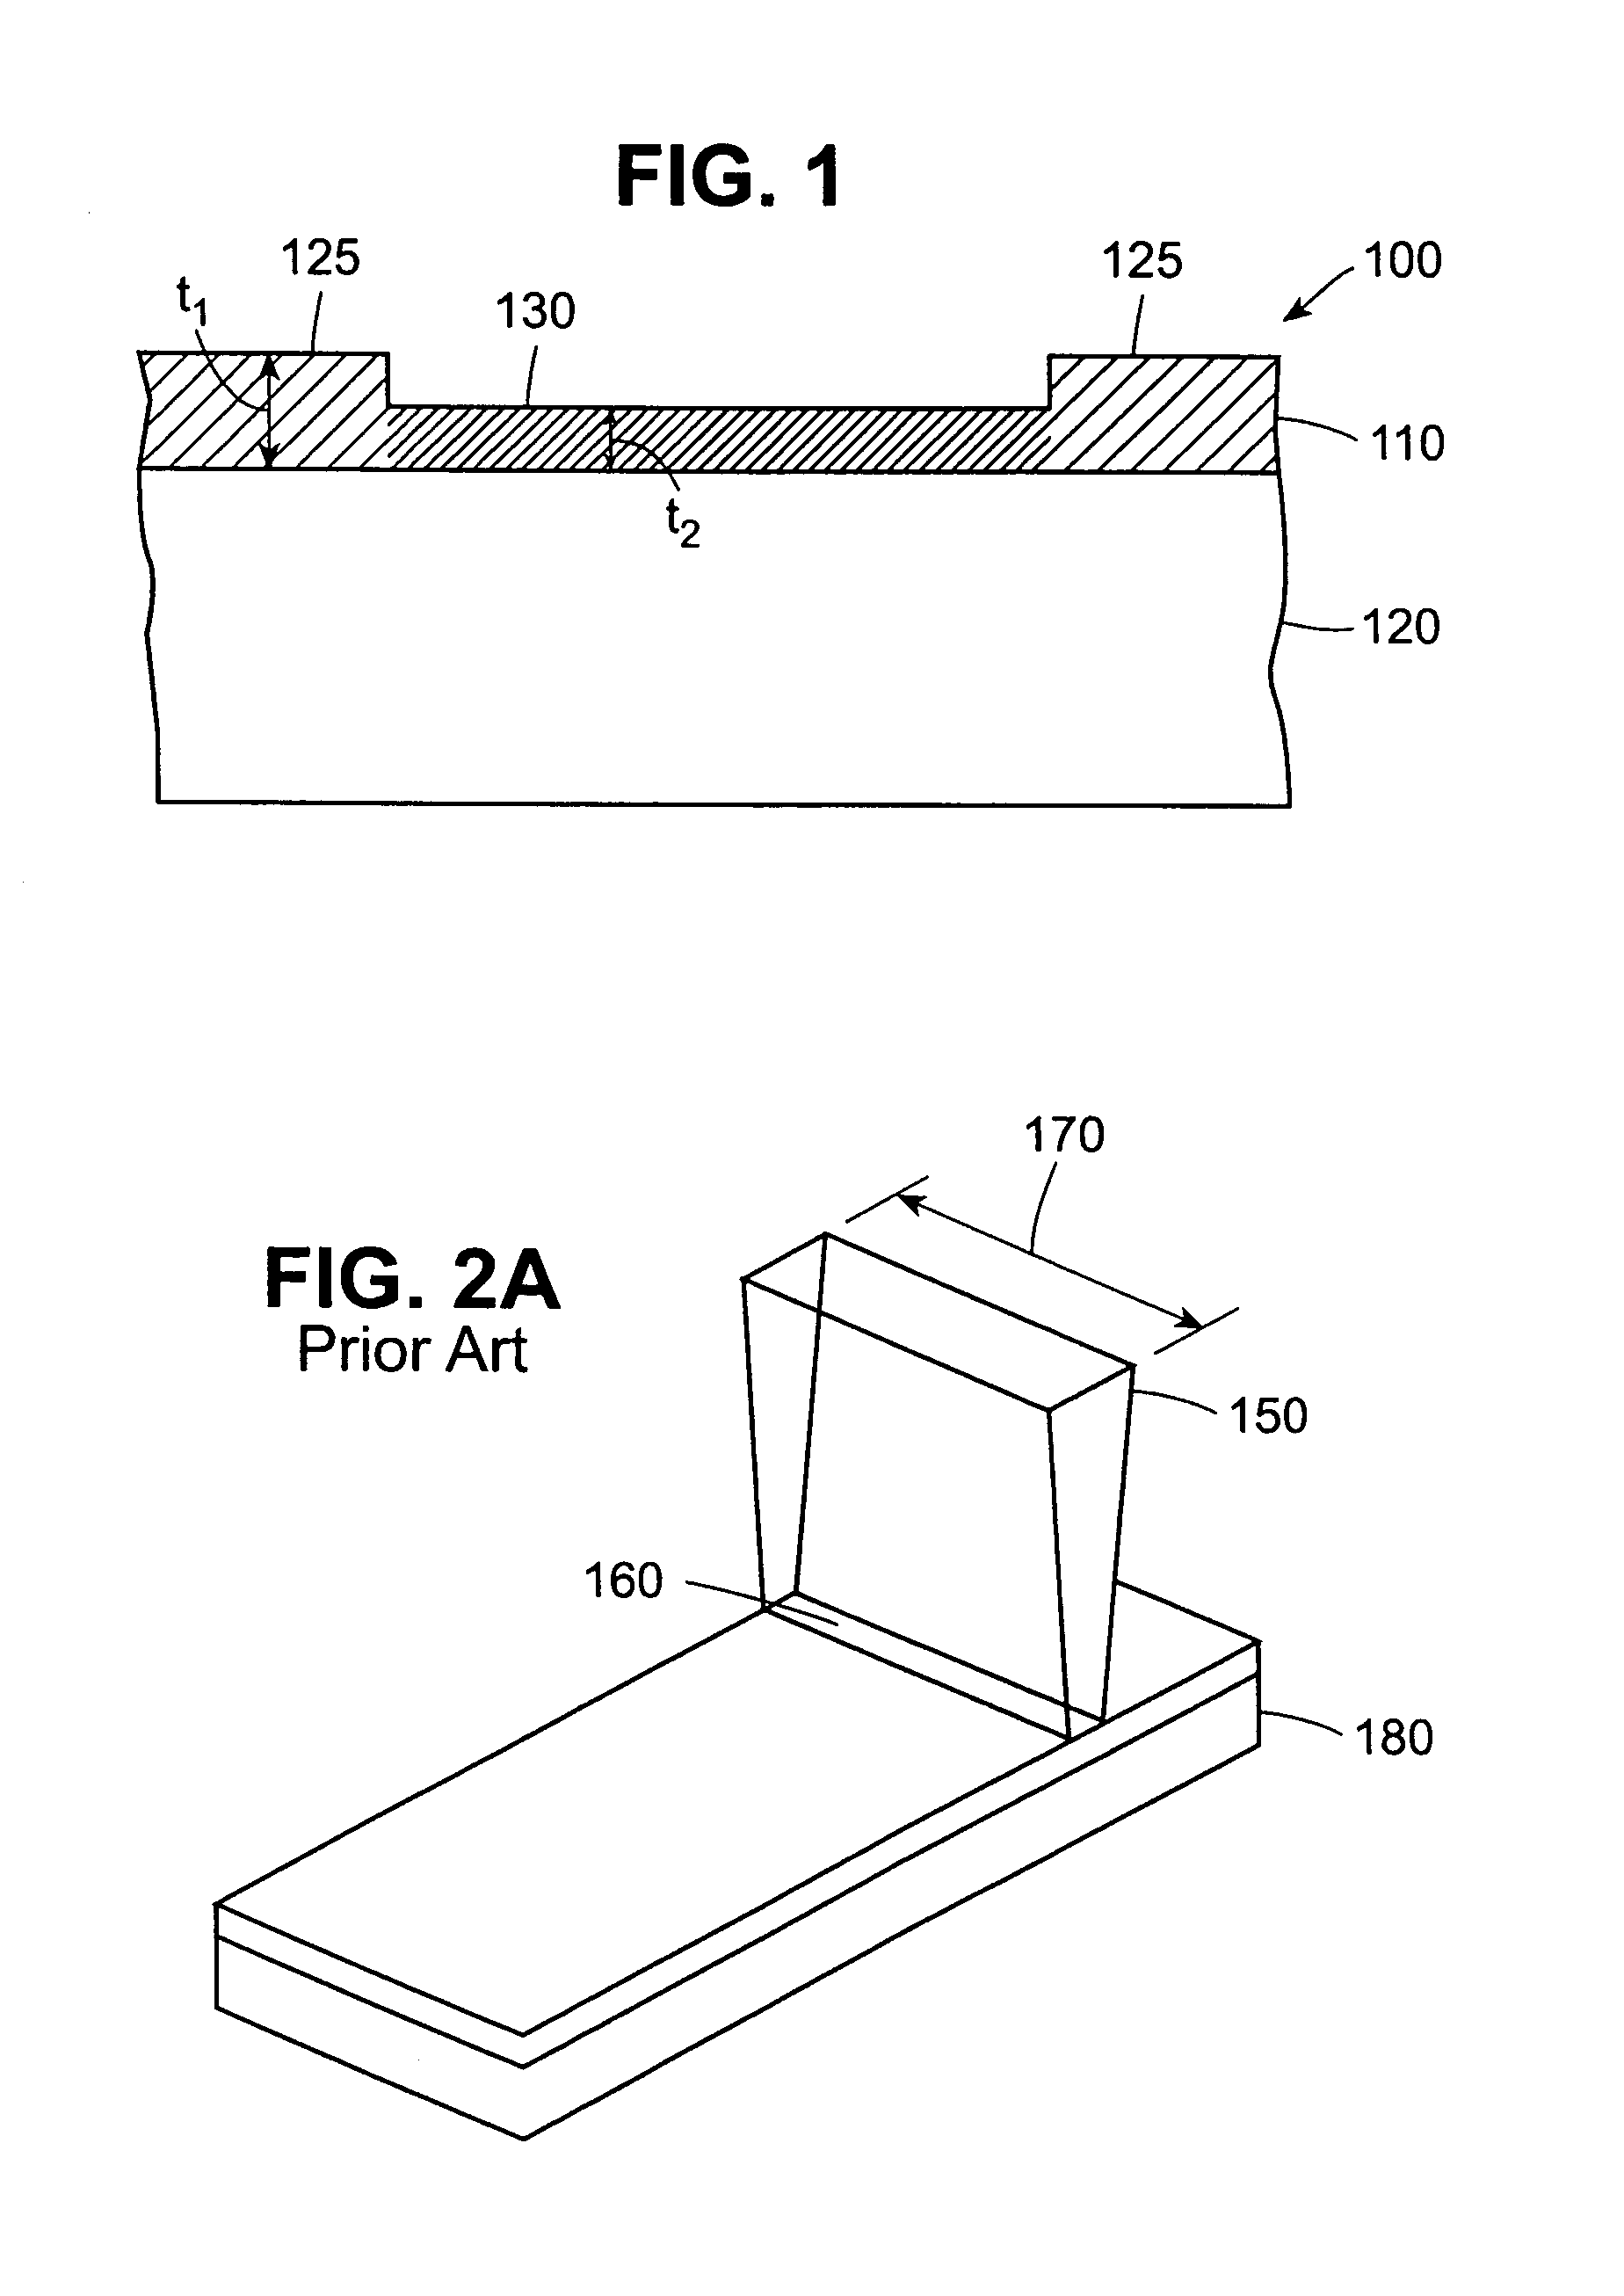 Laser-irradiated thin films having variable thickness